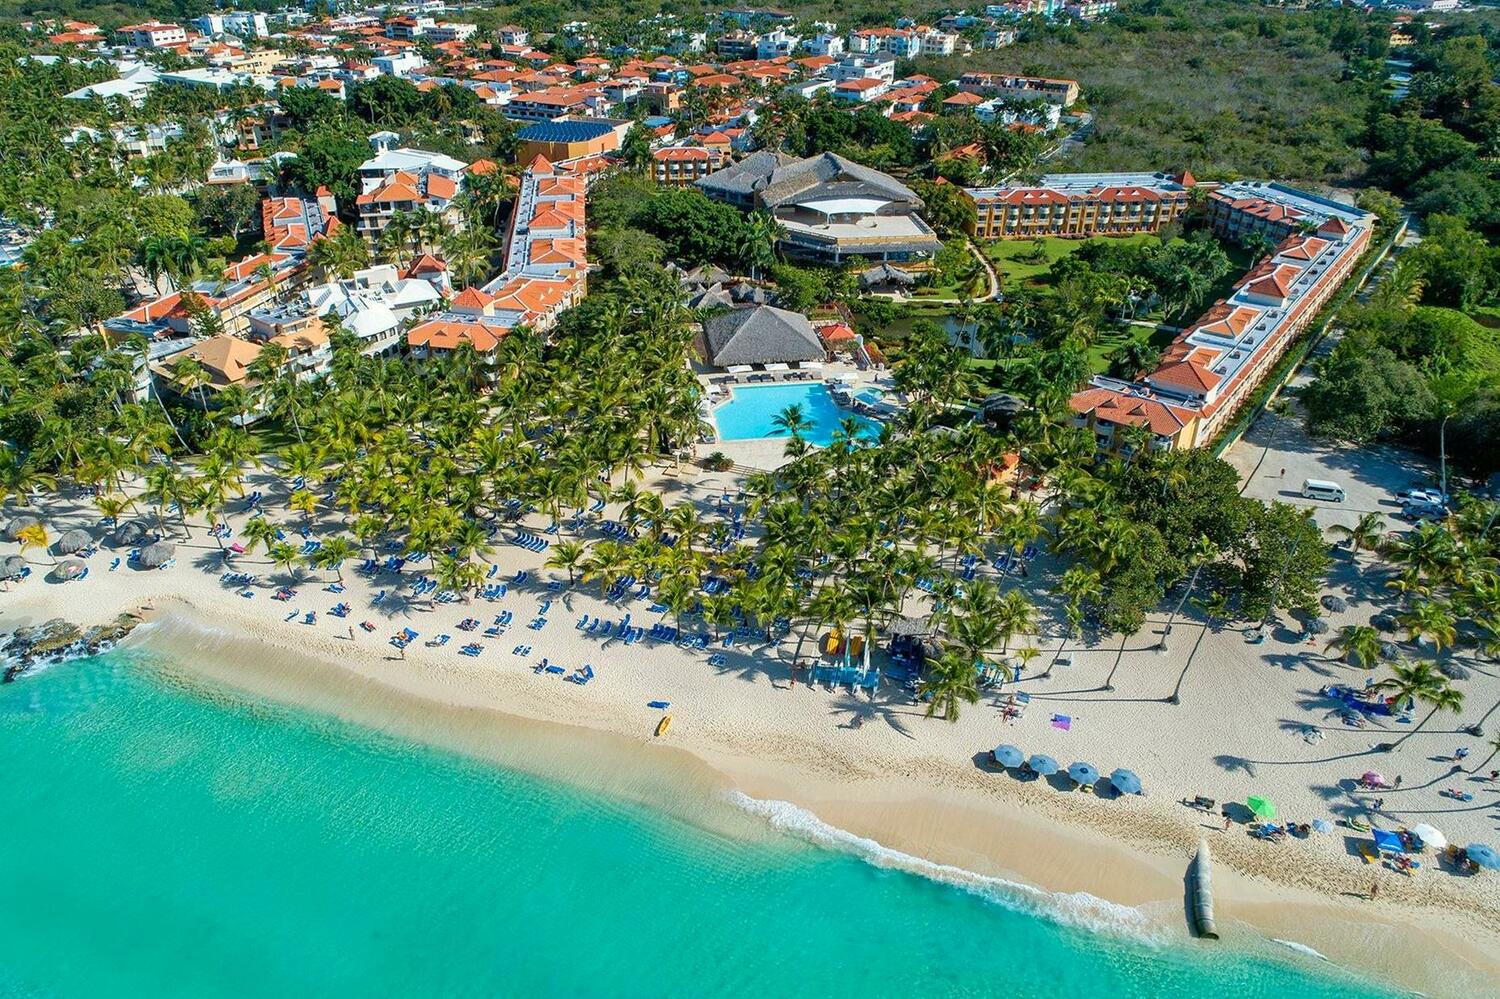 <span style="font-weight: bold;">Viva Wyndham Dominicus Palace 4 *&nbsp;&nbsp;</span><br>